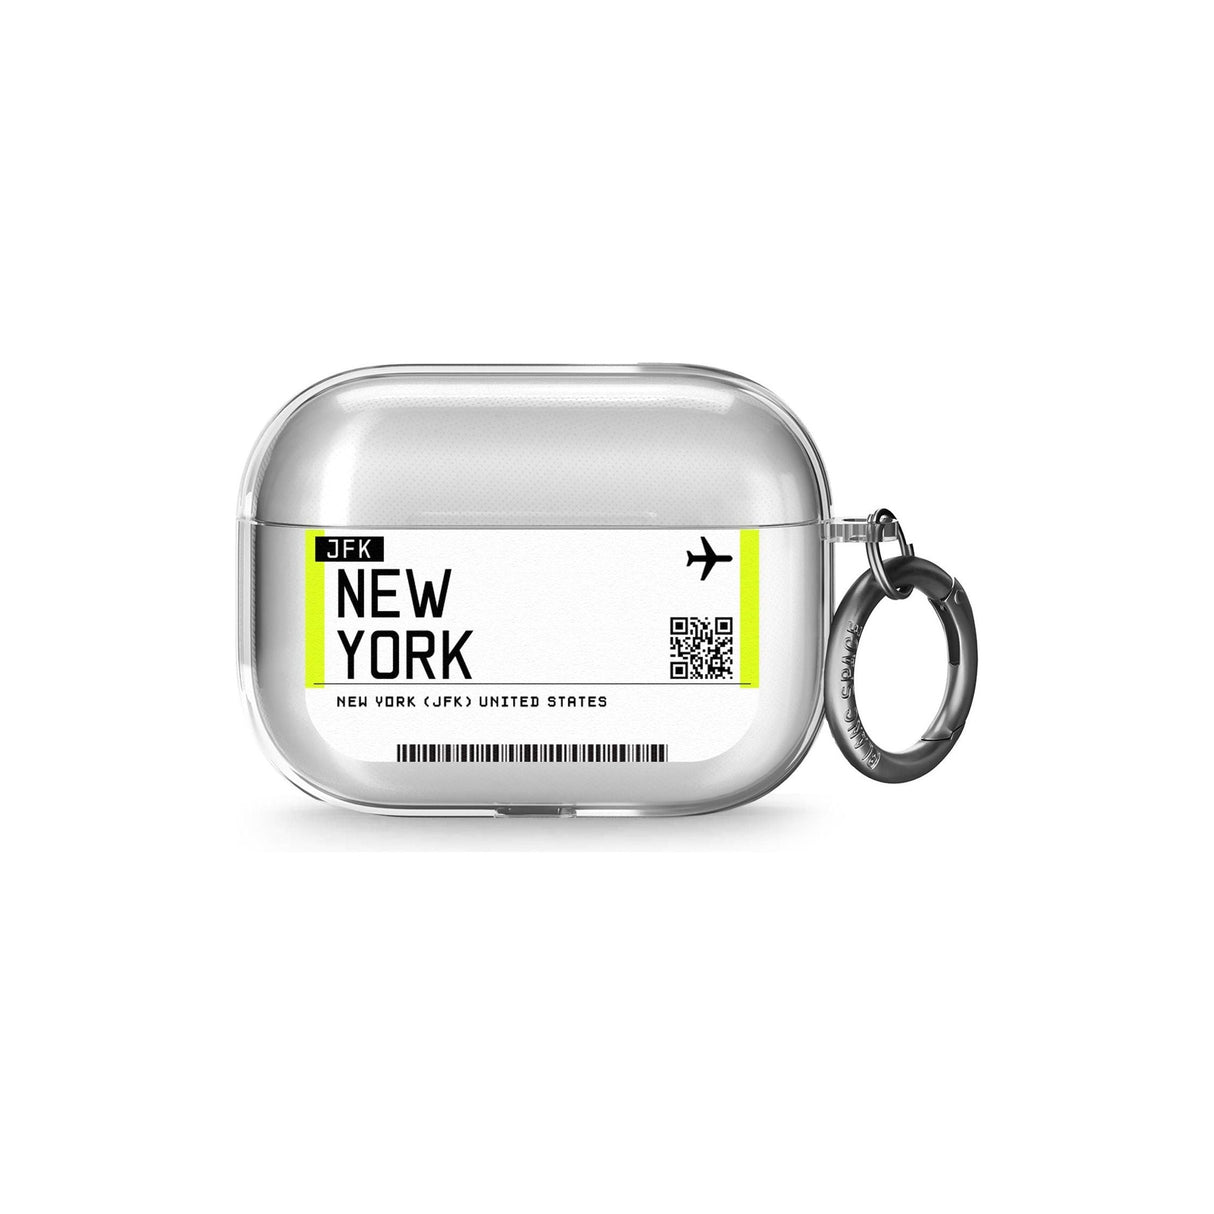 New York Boarding Pass Airpods Pro Case